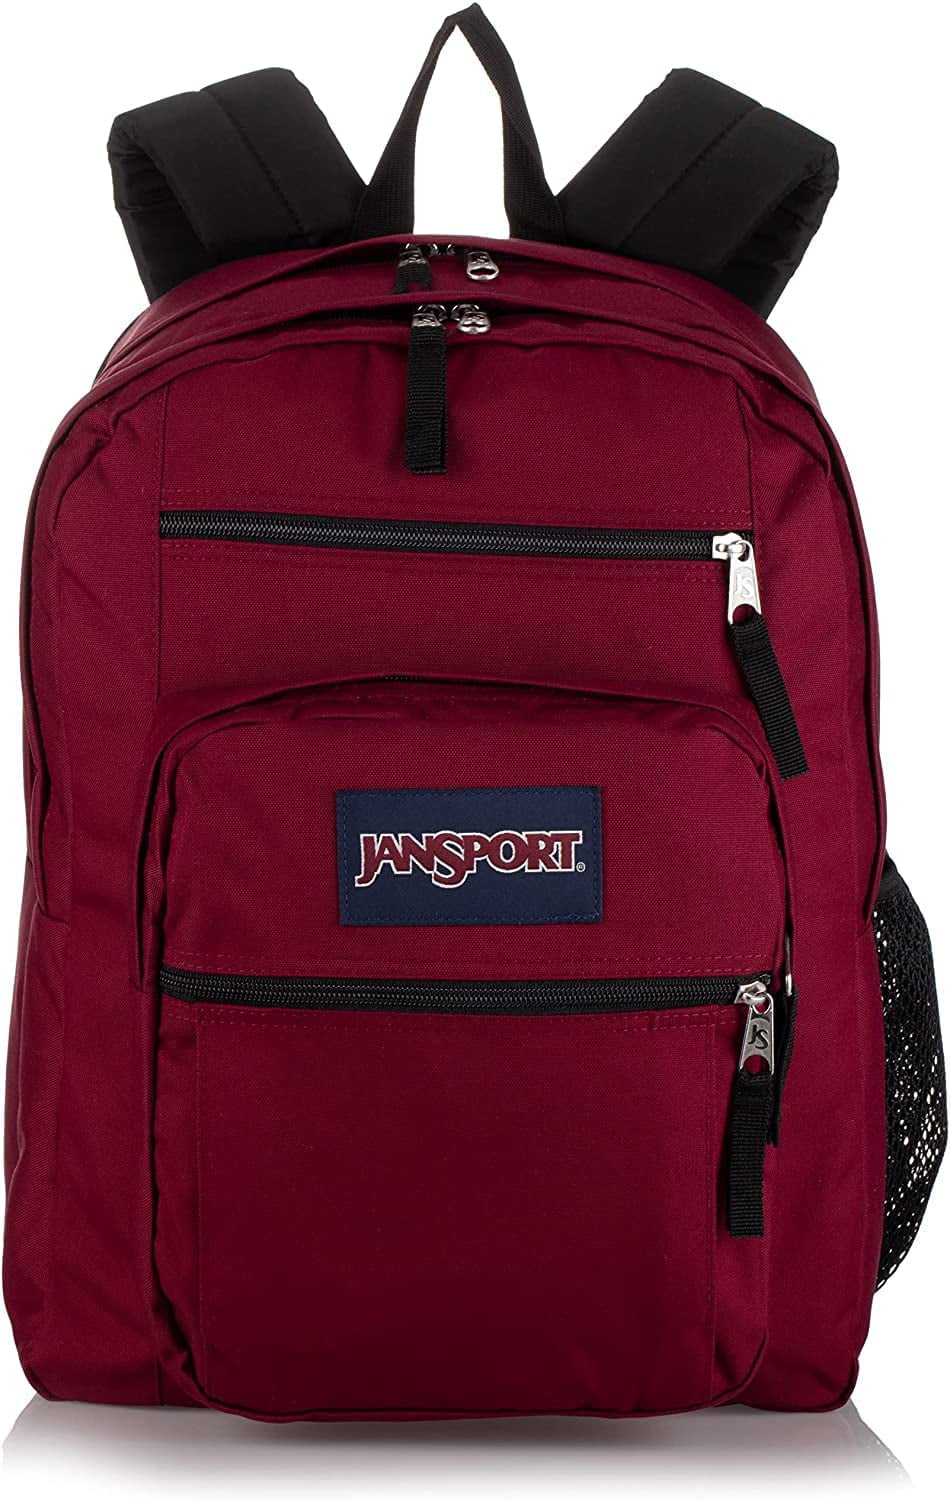 Bookbag School, Or Backpack With Travel, JanSport Big - Laptop Student RED) Compartment(RUSSET 15-Inch Work